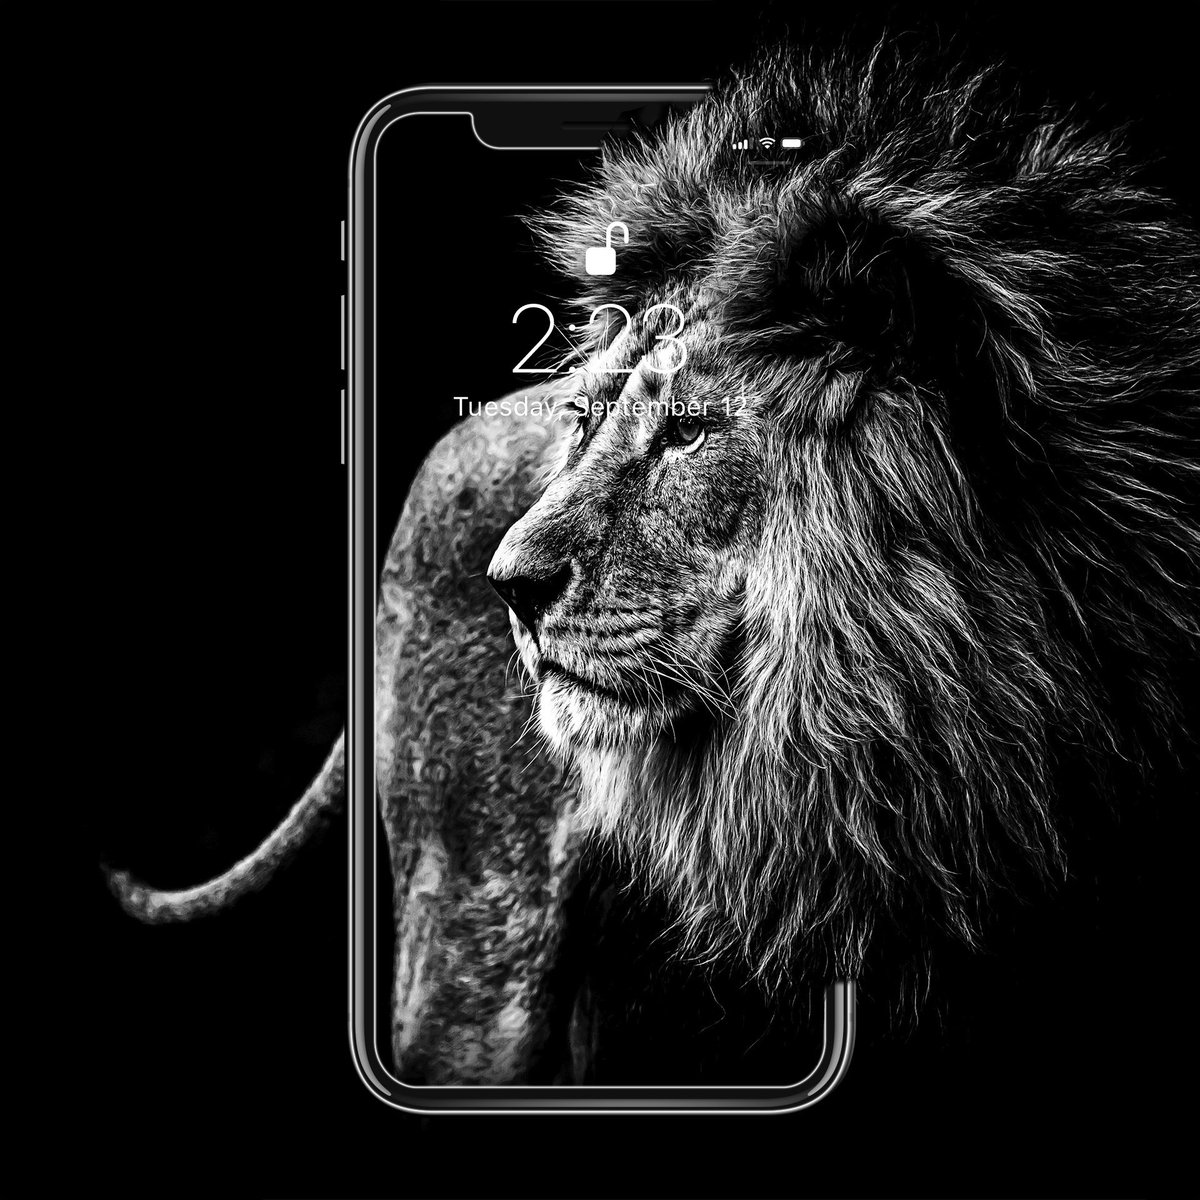 Lion Wallpaper Black And White Handy Hintergrund Hd Wallpaper Backgrounds Download